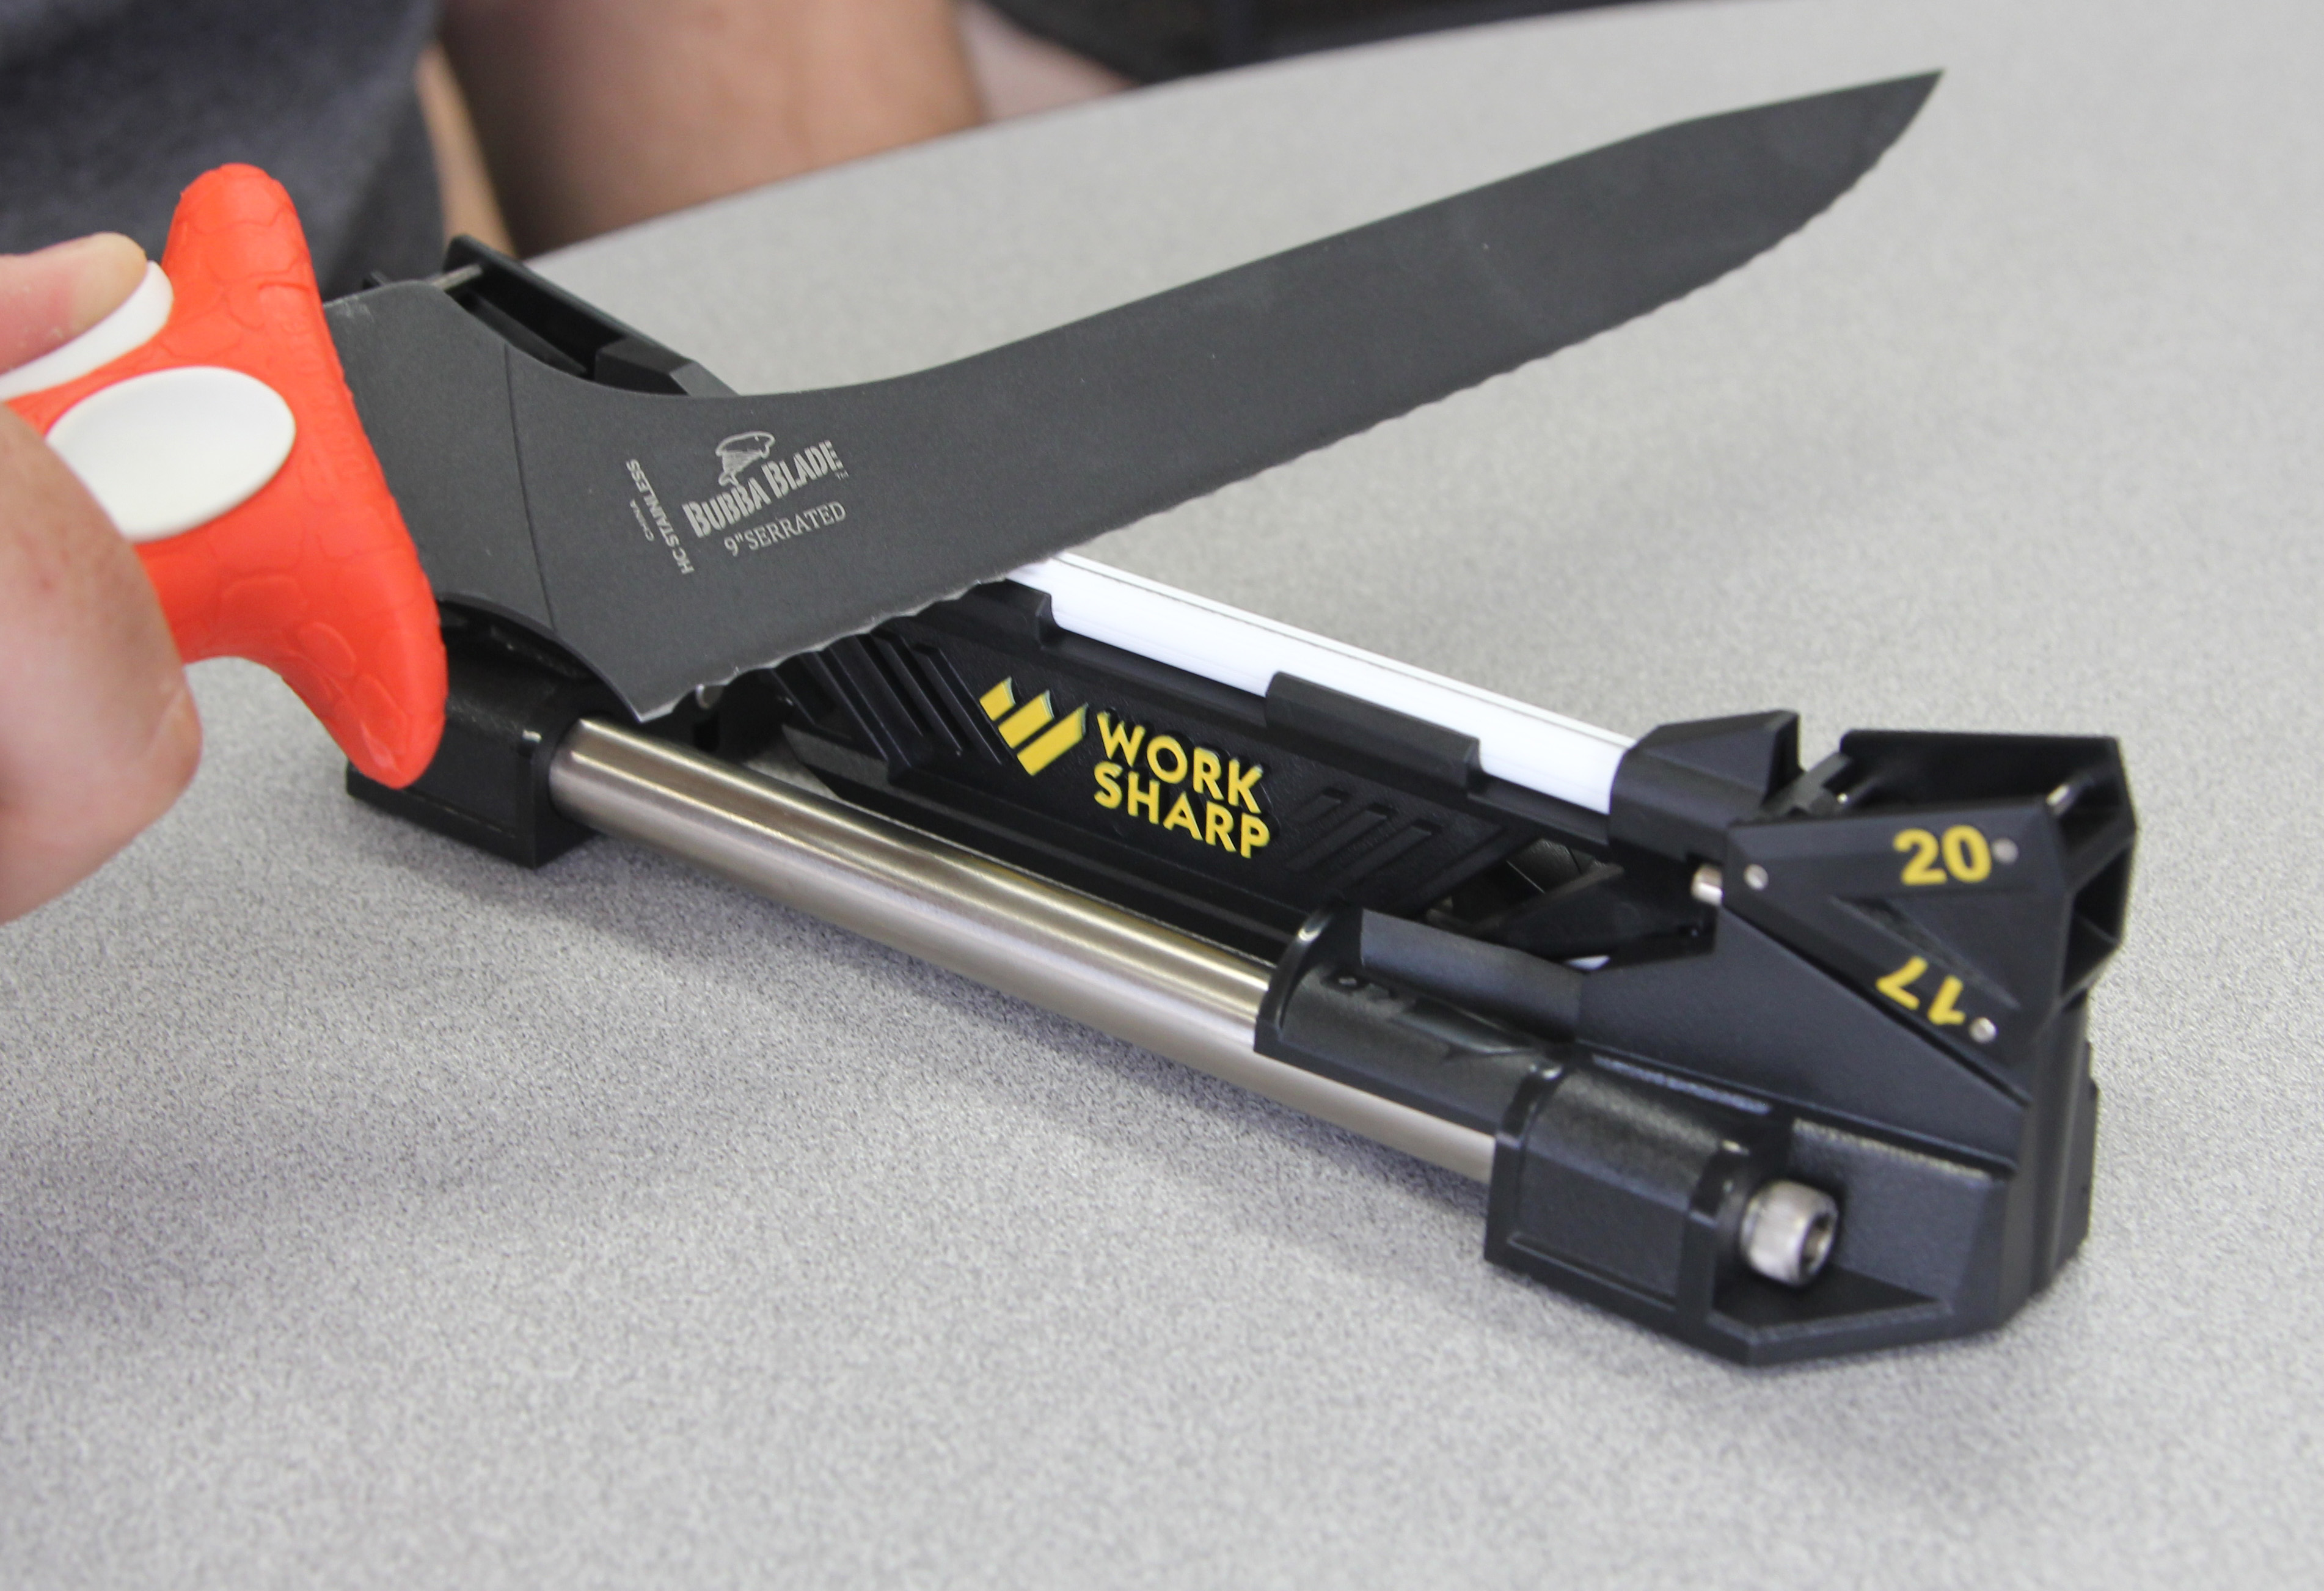 Work Sharp - Guided Sharpening System